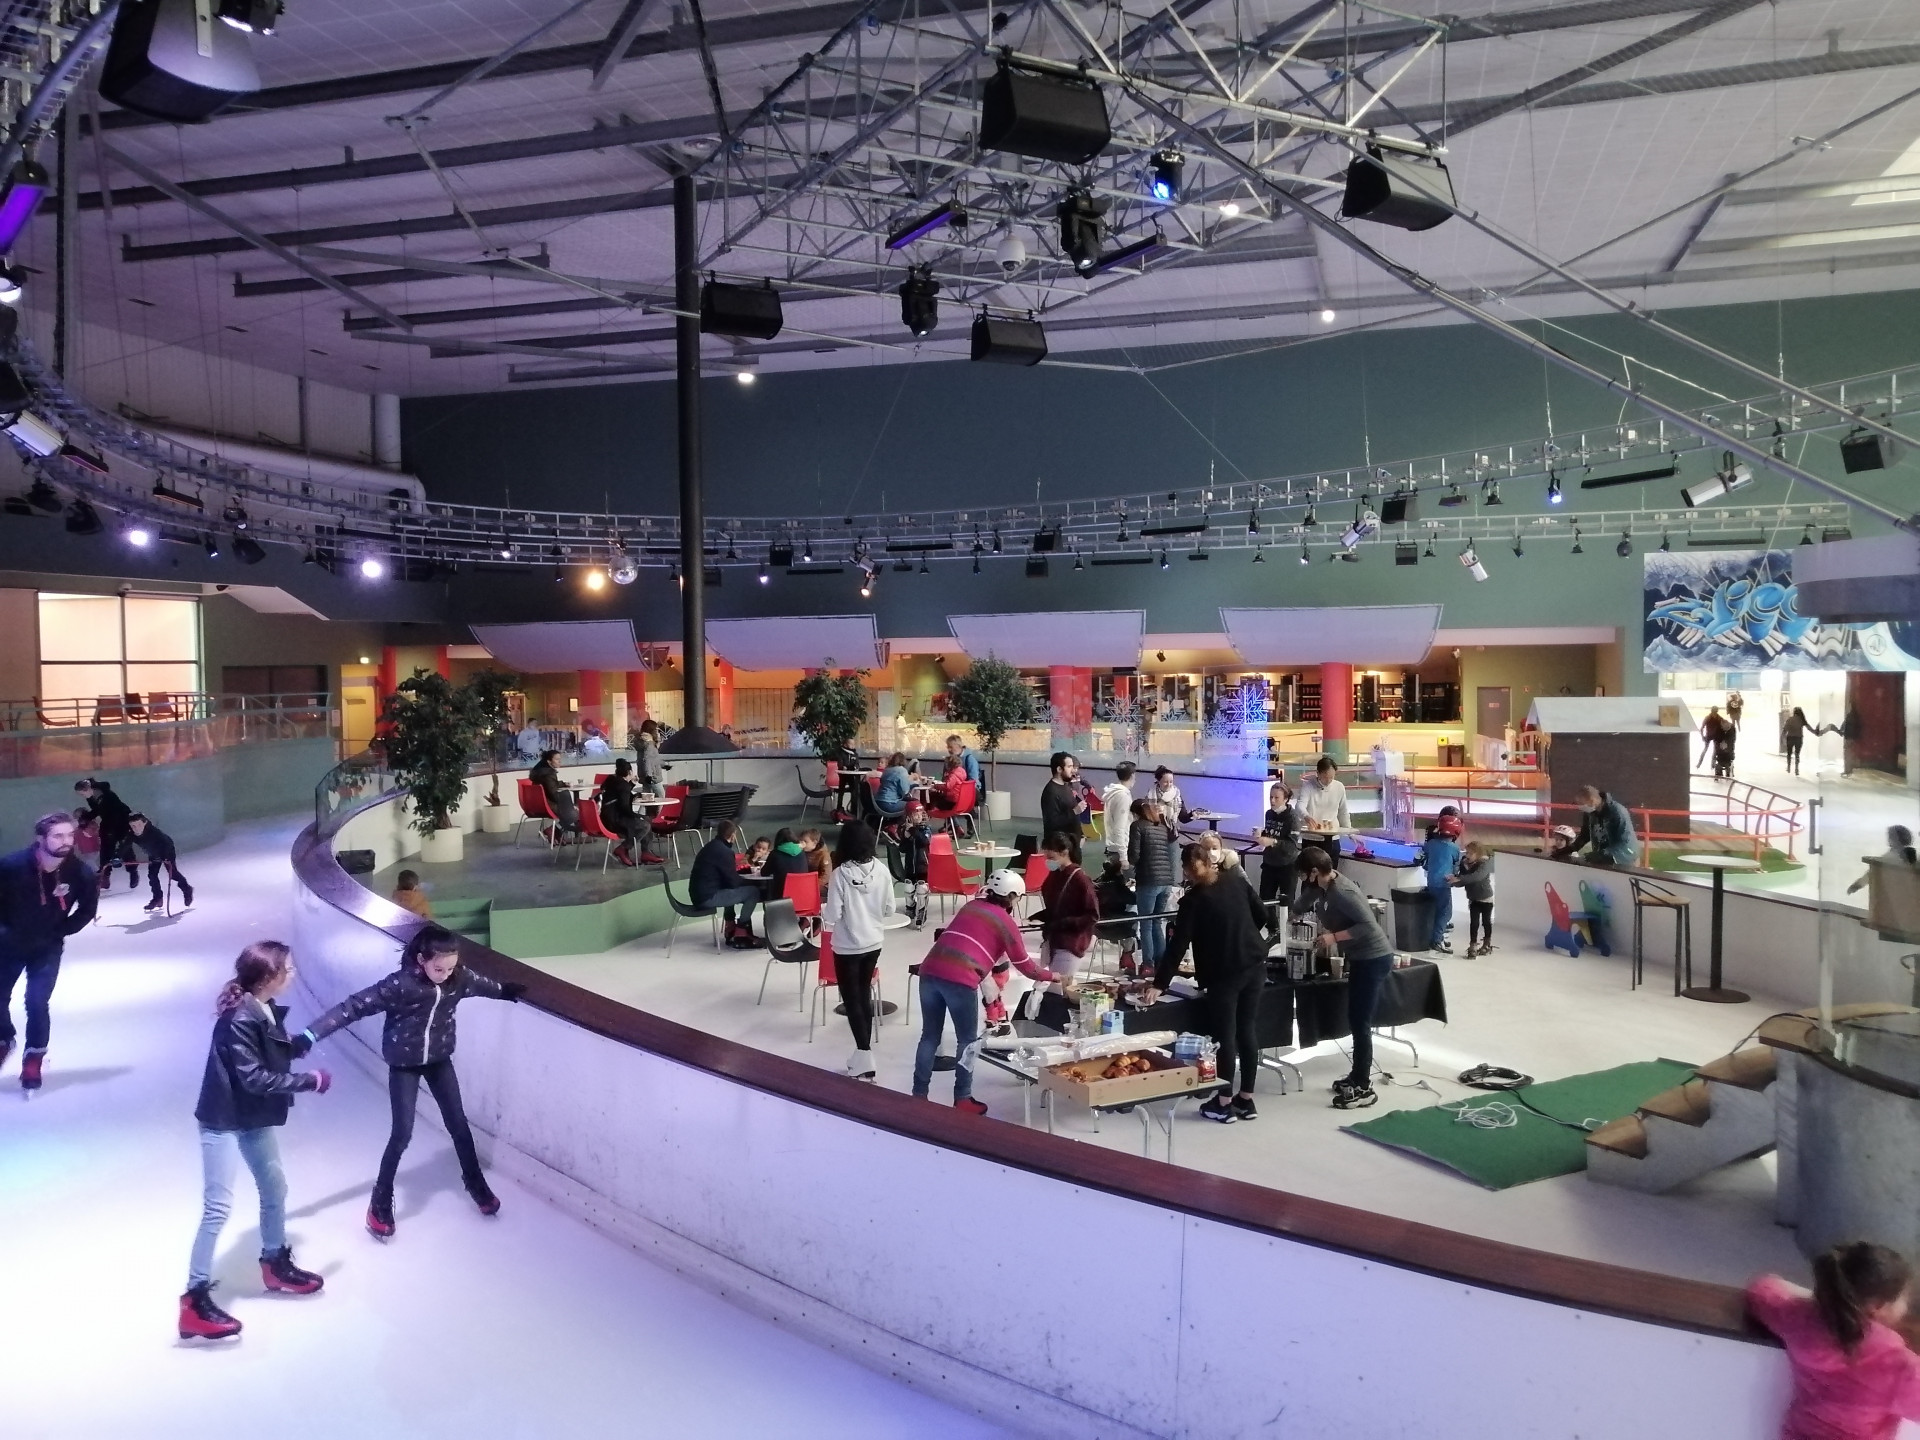 patinoire-glisseo-cholet-49